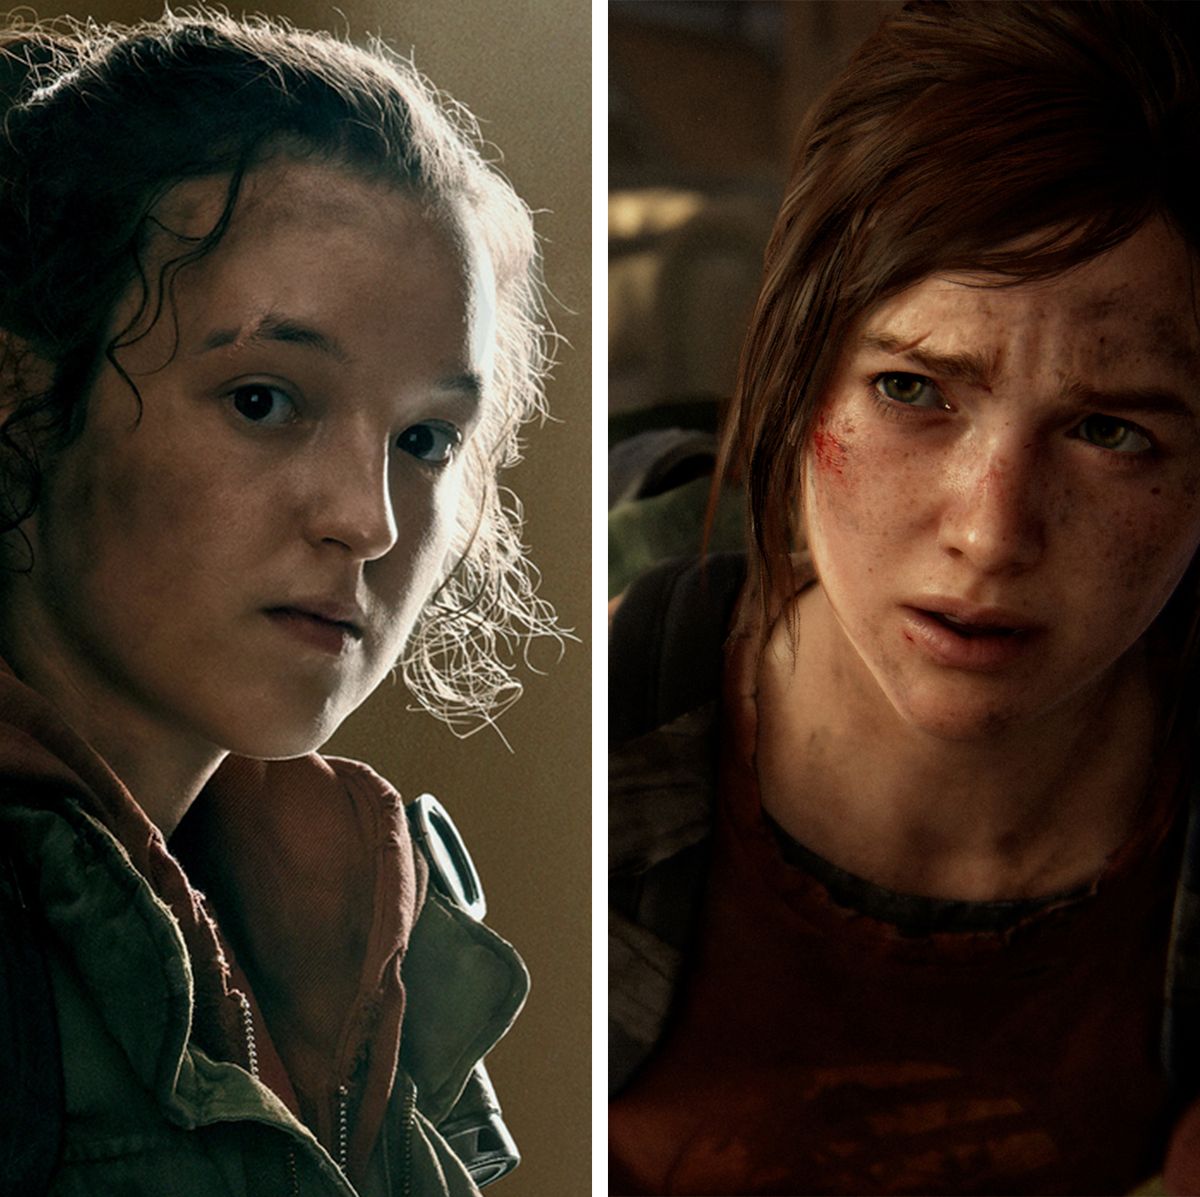 Fans are convinced Bella Ramsey will be recast in The Last of Us